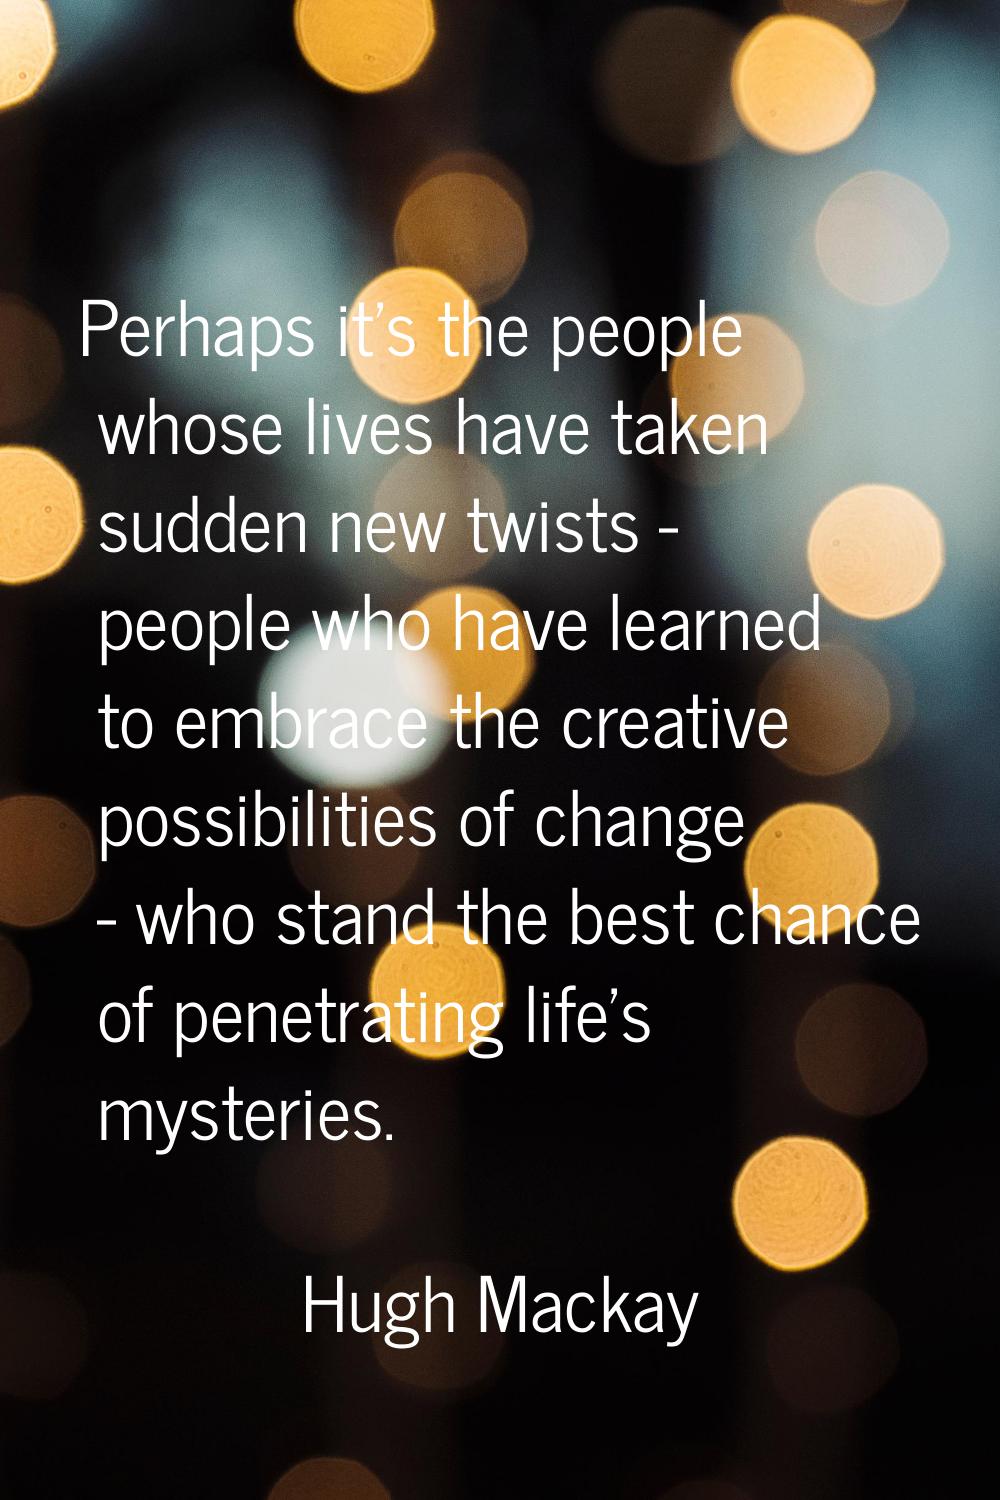 Perhaps it's the people whose lives have taken sudden new twists - people who have learned to embra